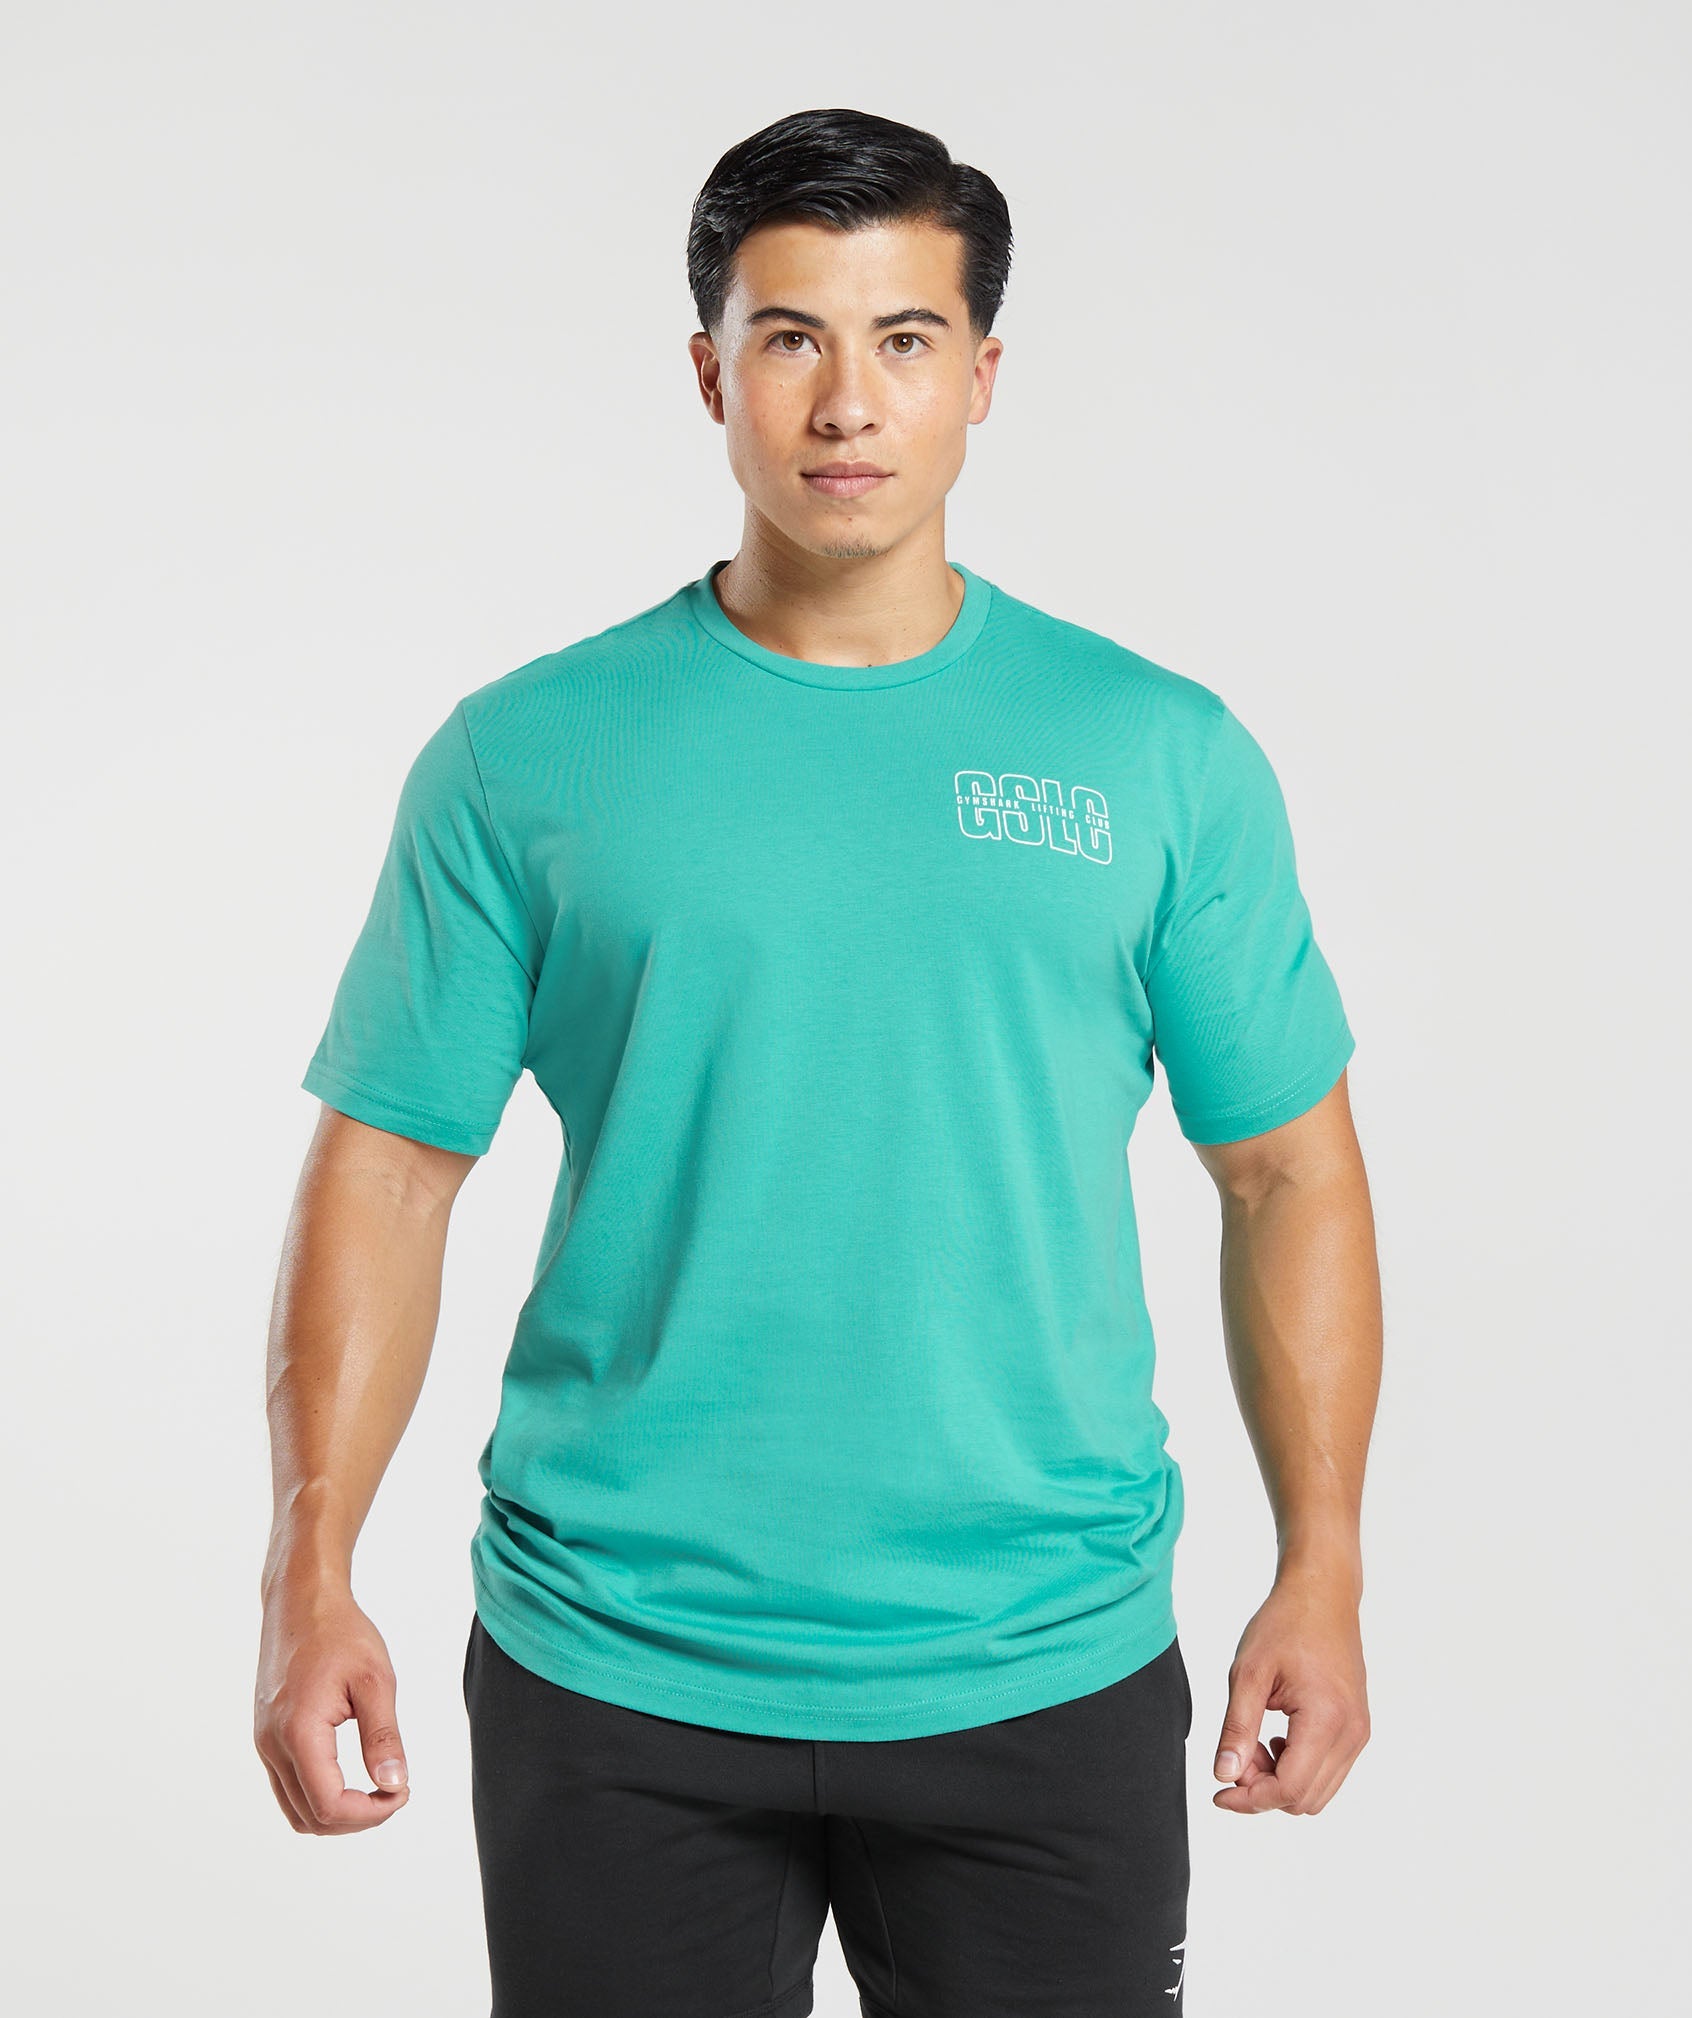 Lifting Club T-Shirt in {{variantColor} is out of stock